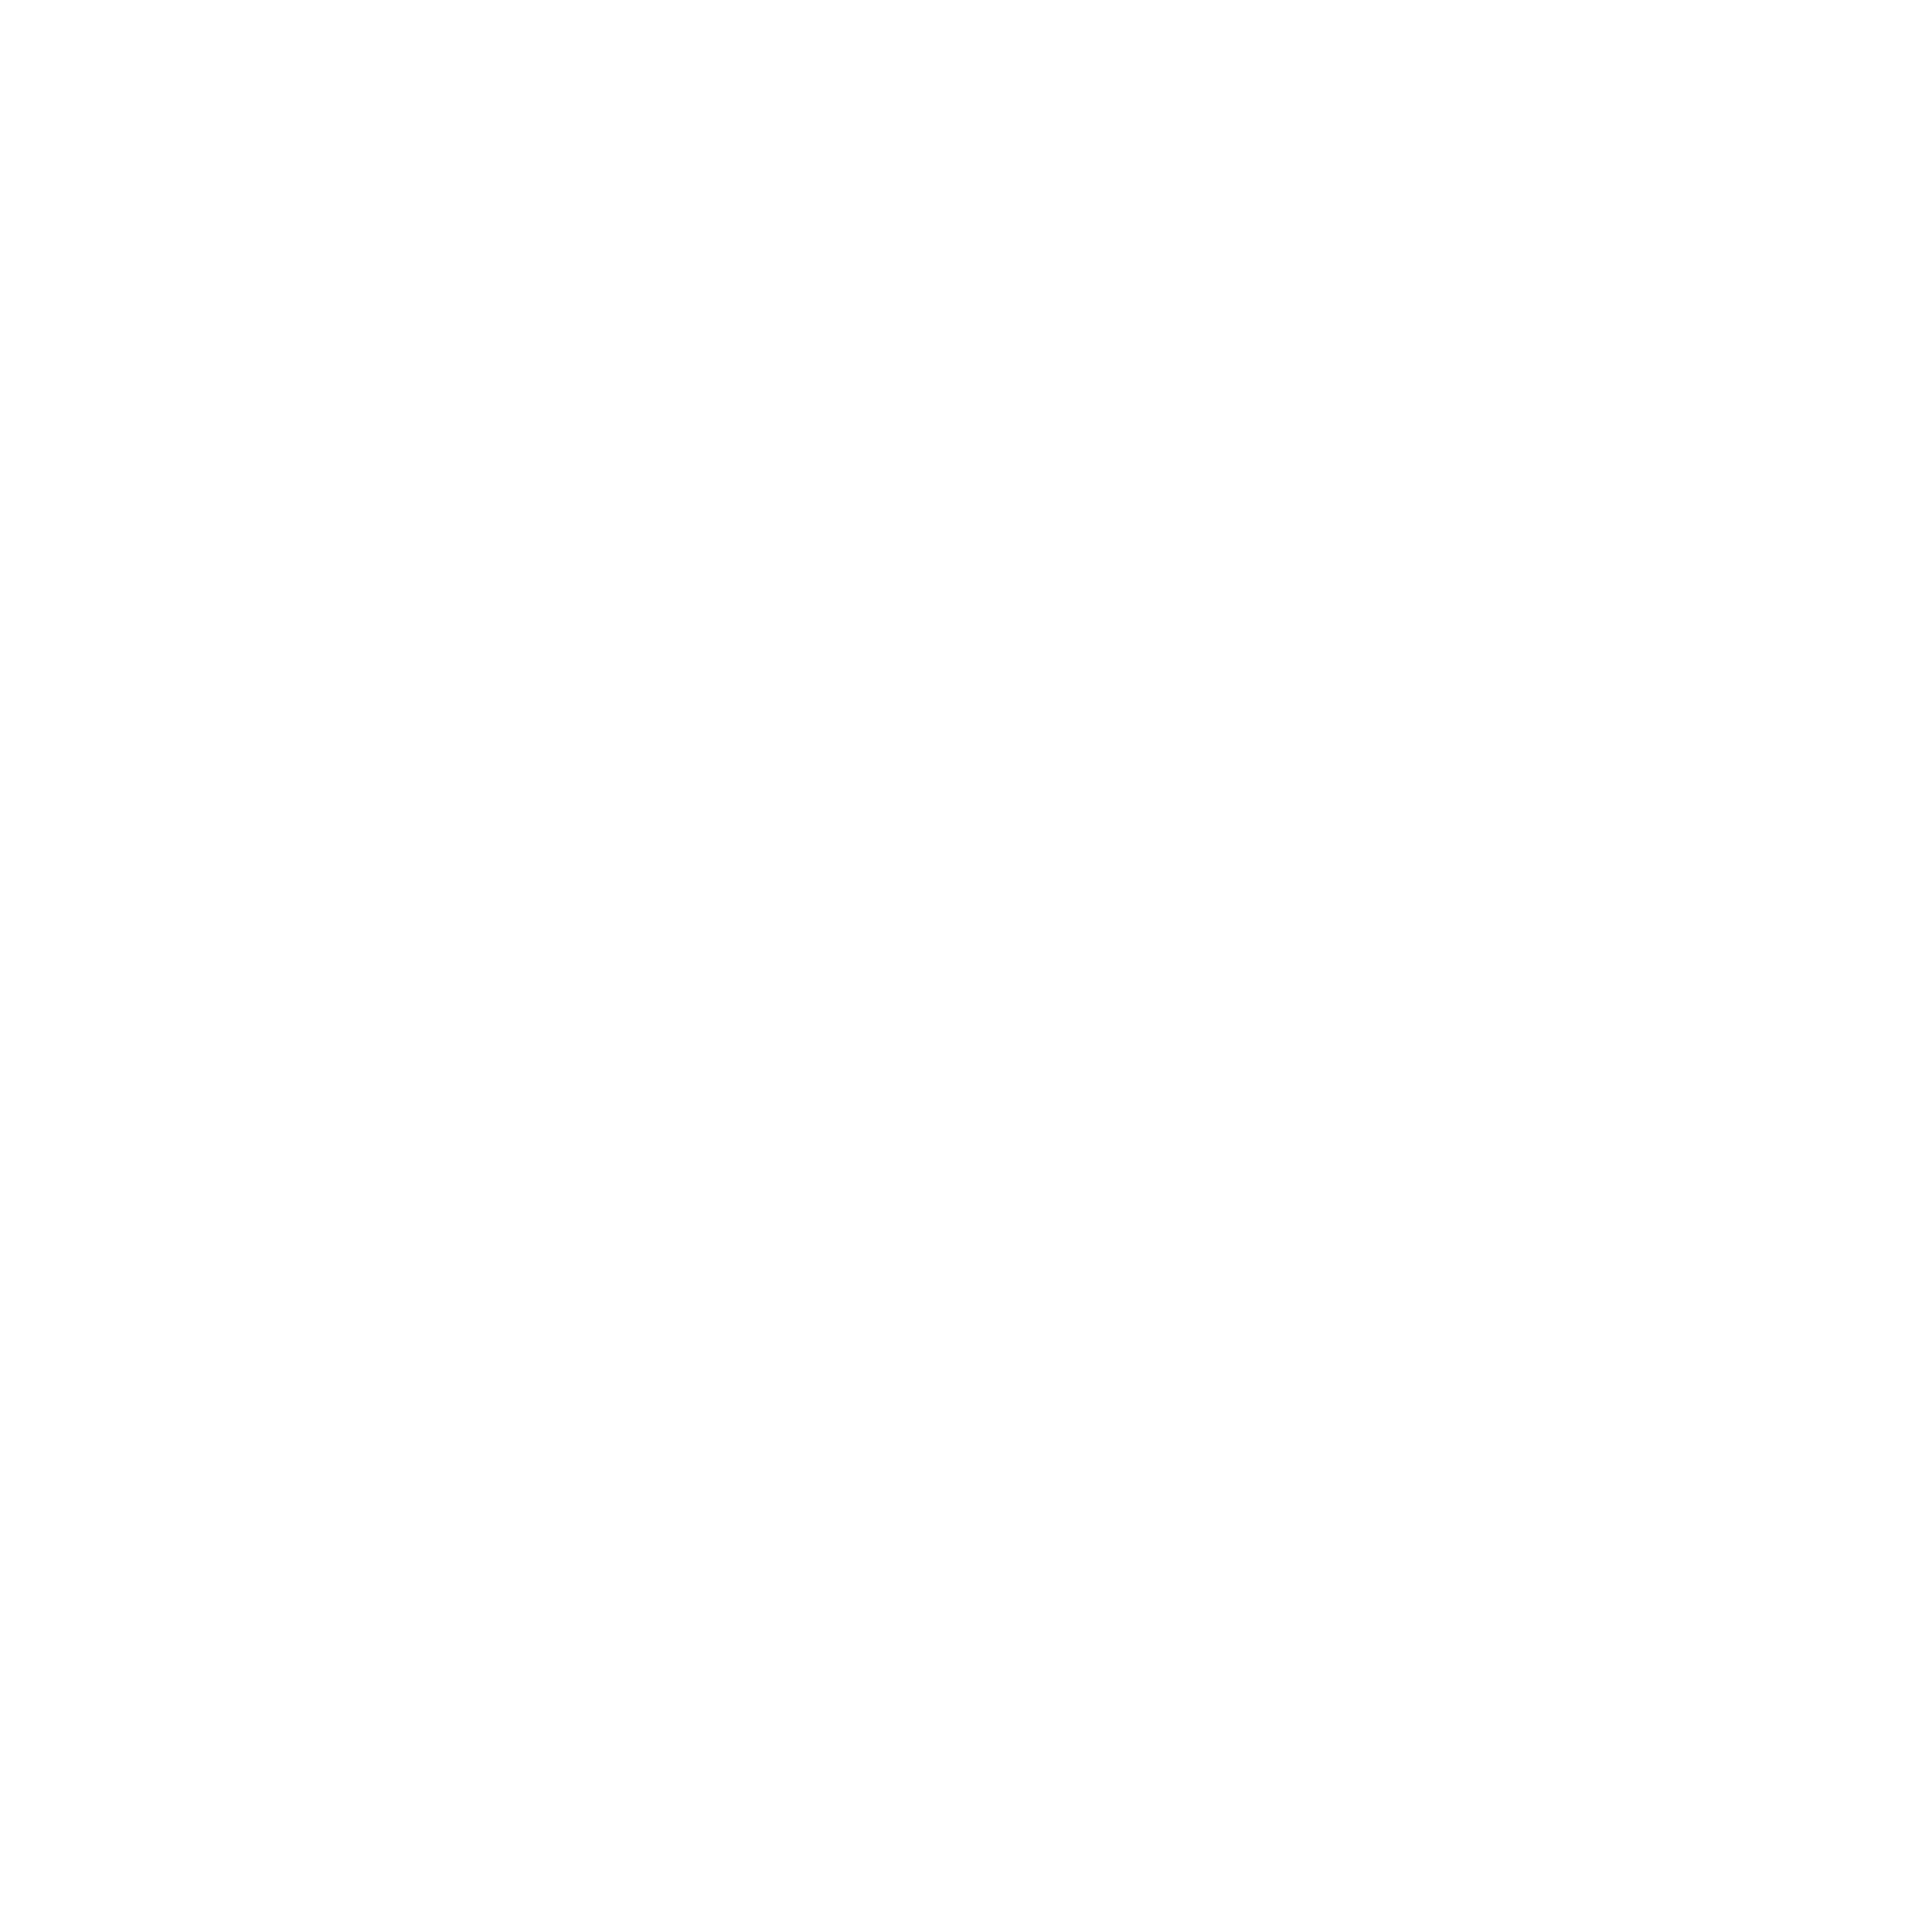 The National Parks Fan Club